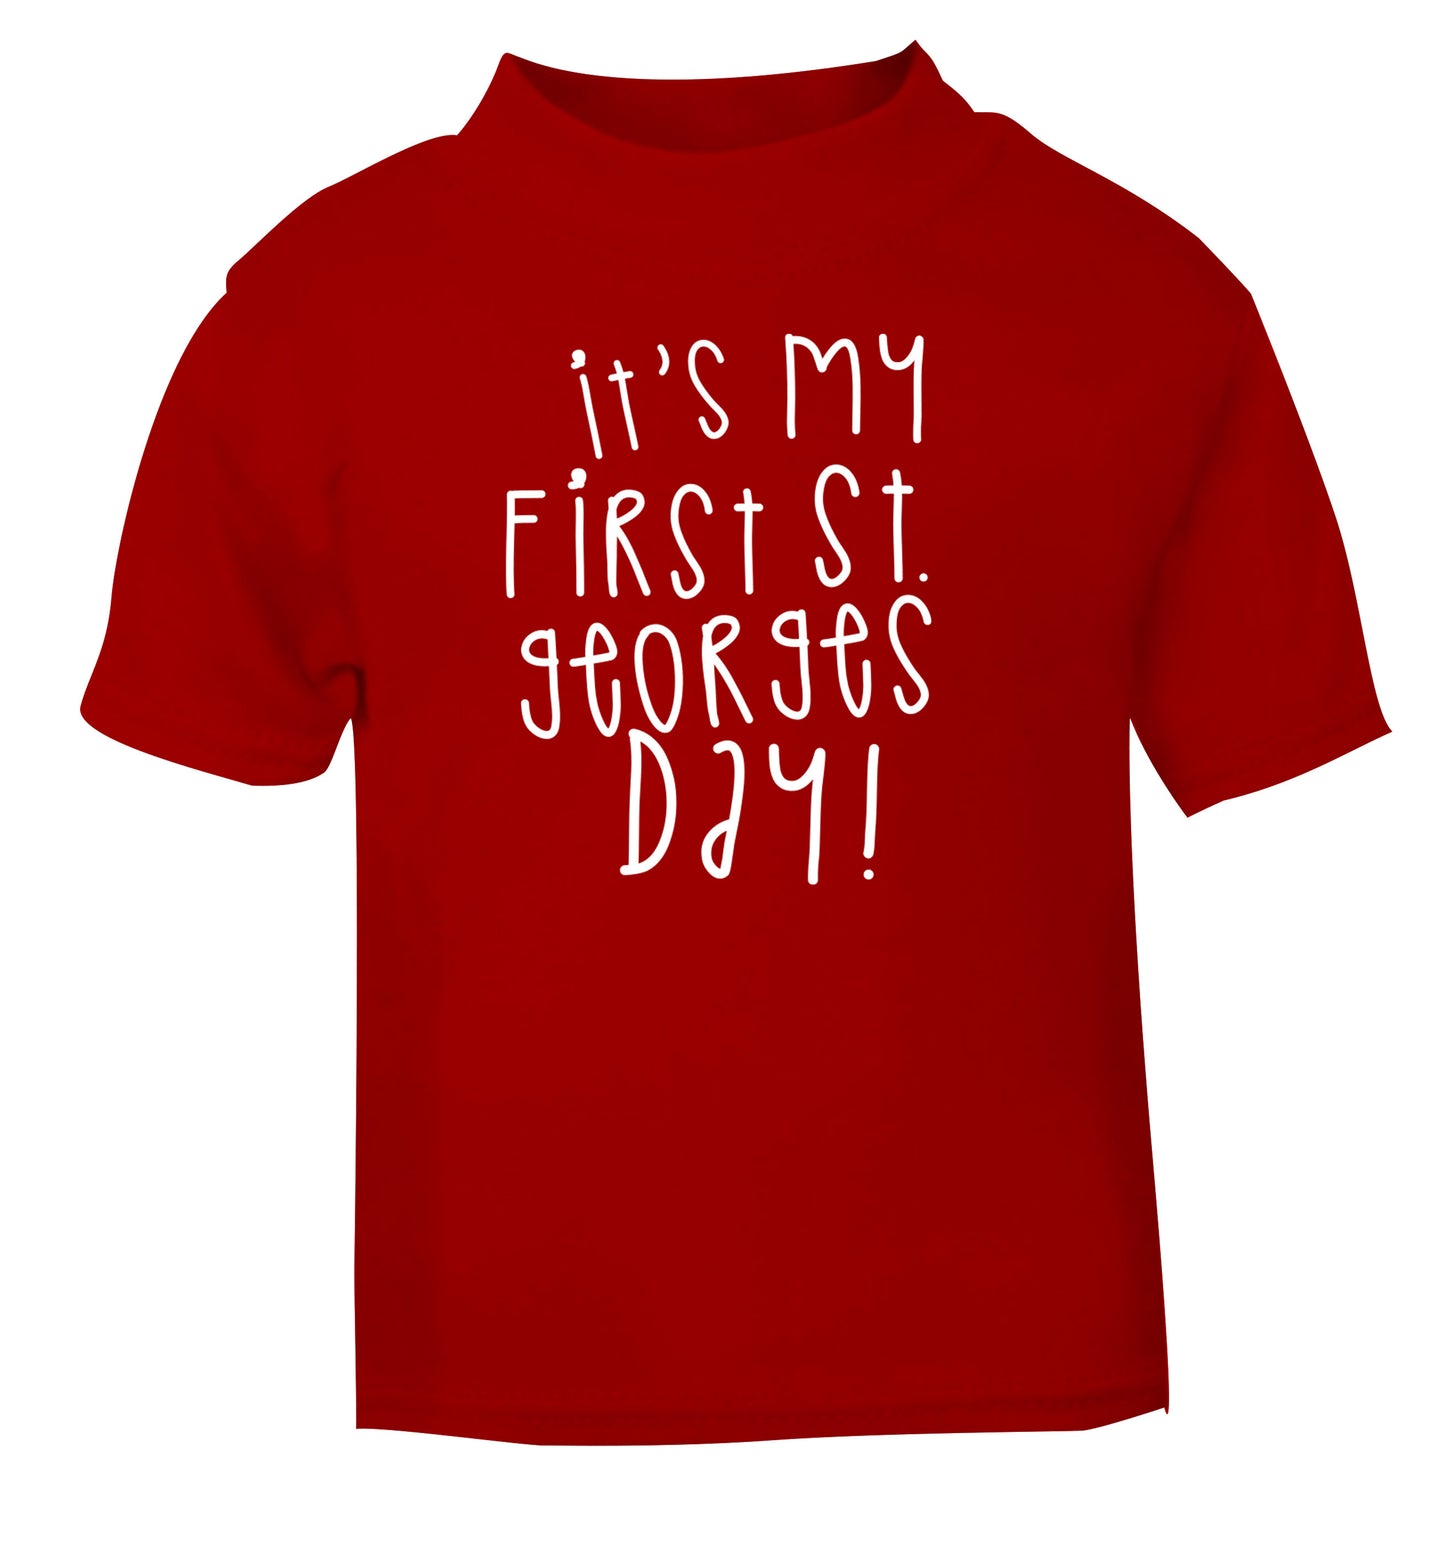 It's my first St Georges day red Baby Toddler Tshirt 2 Years